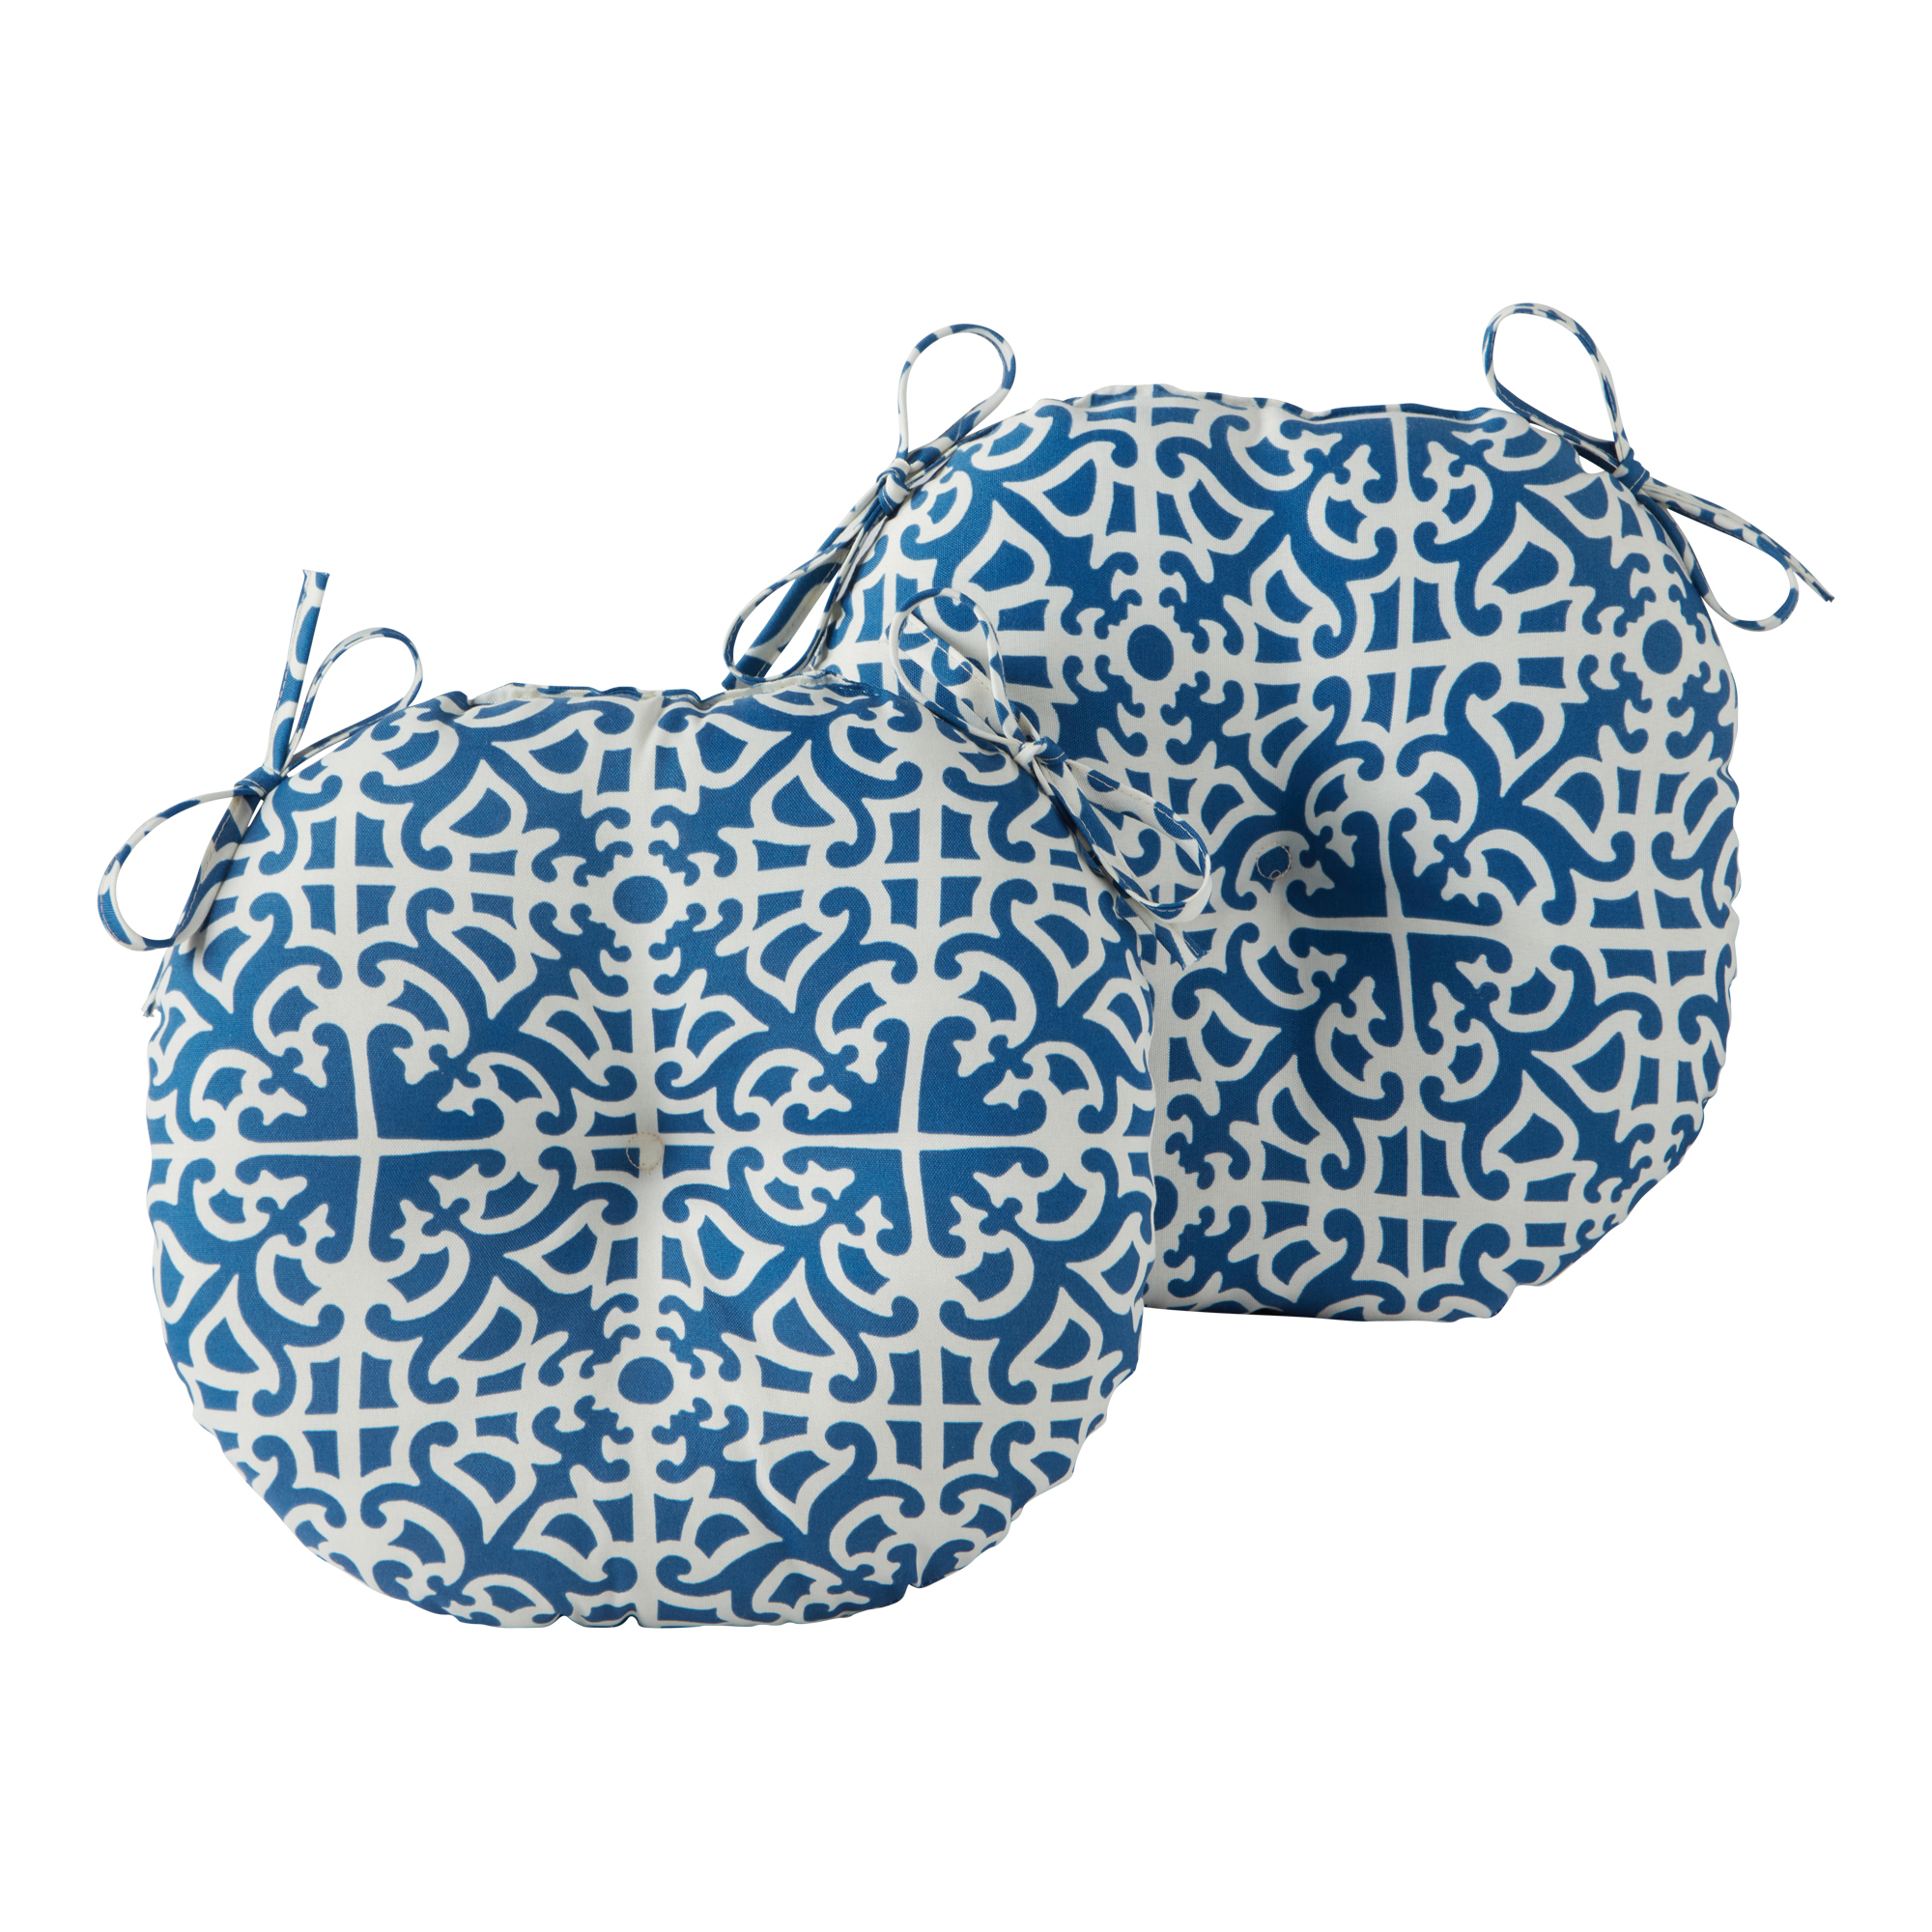 Greendale Home Fashions Indigo Lattice 15 in. Round Outdoor Reversible Bistro Seat Cushion (Set of 2) - image 1 of 6